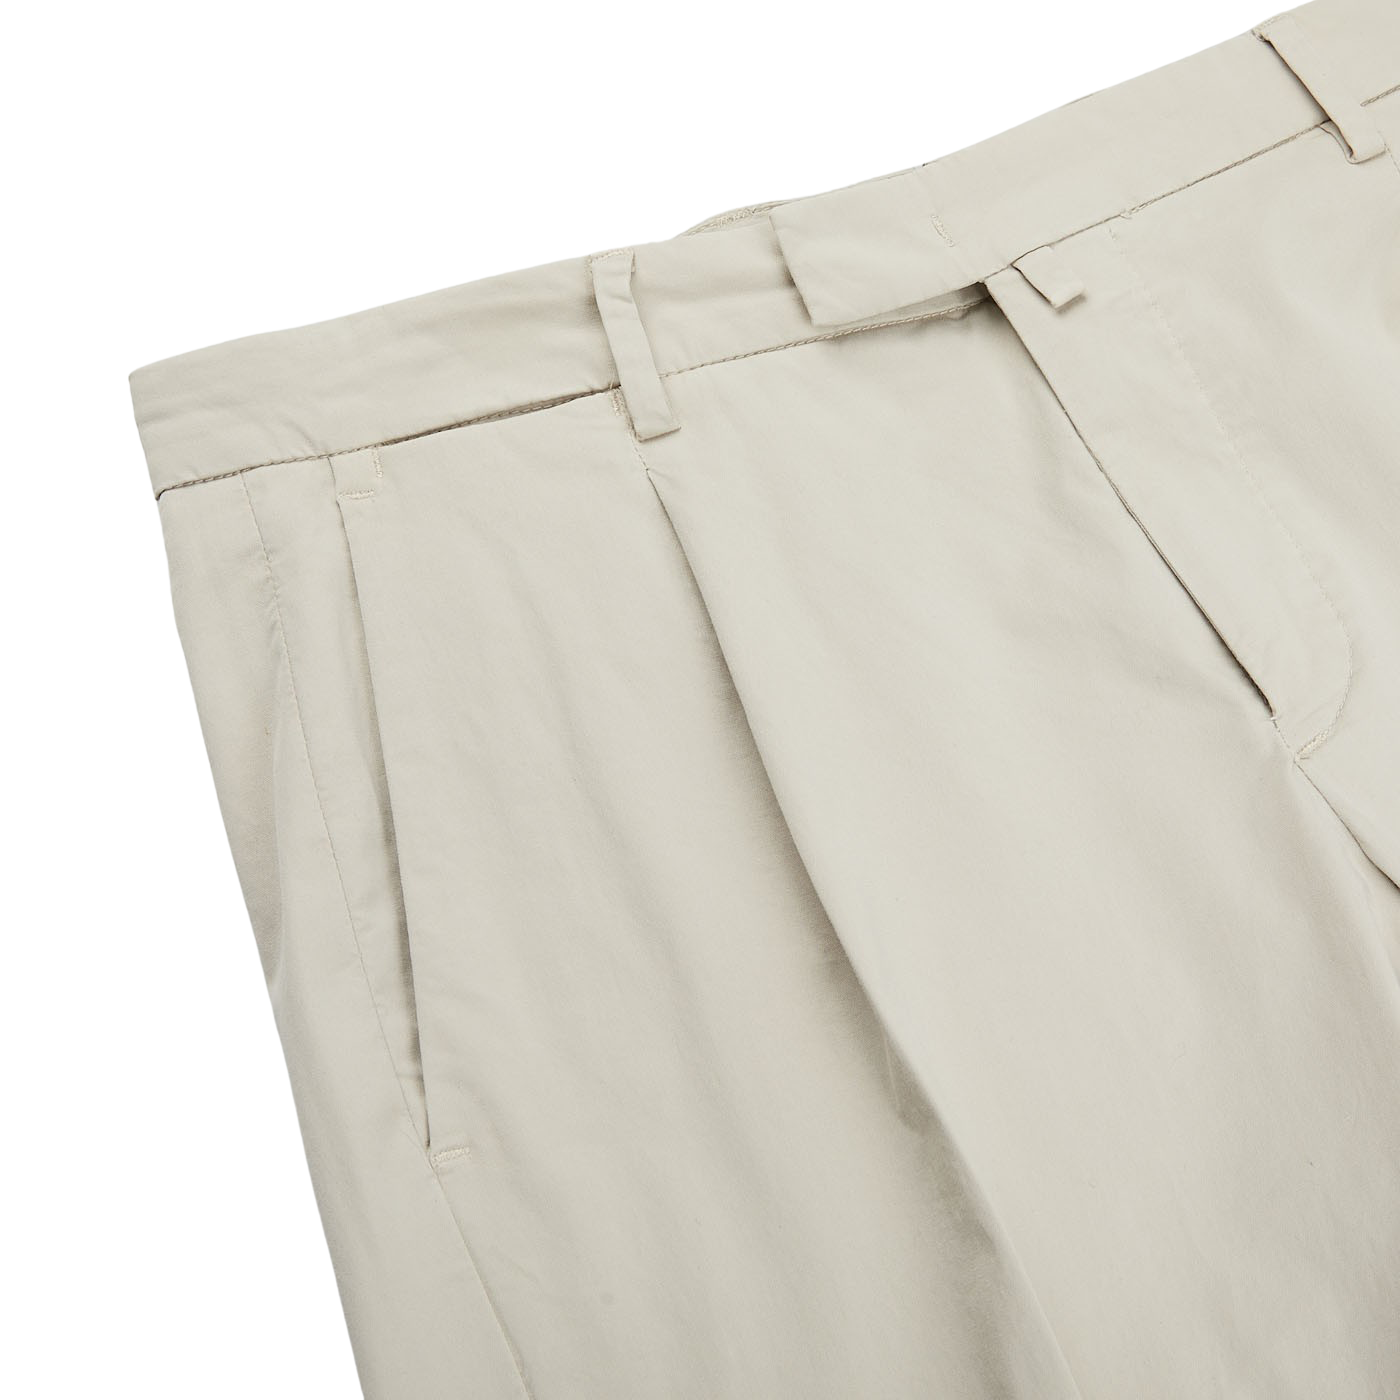 The men's Light Beige Cotton Stretch BG07 Pleated Chinos from Italian trouser specialist Briglia.